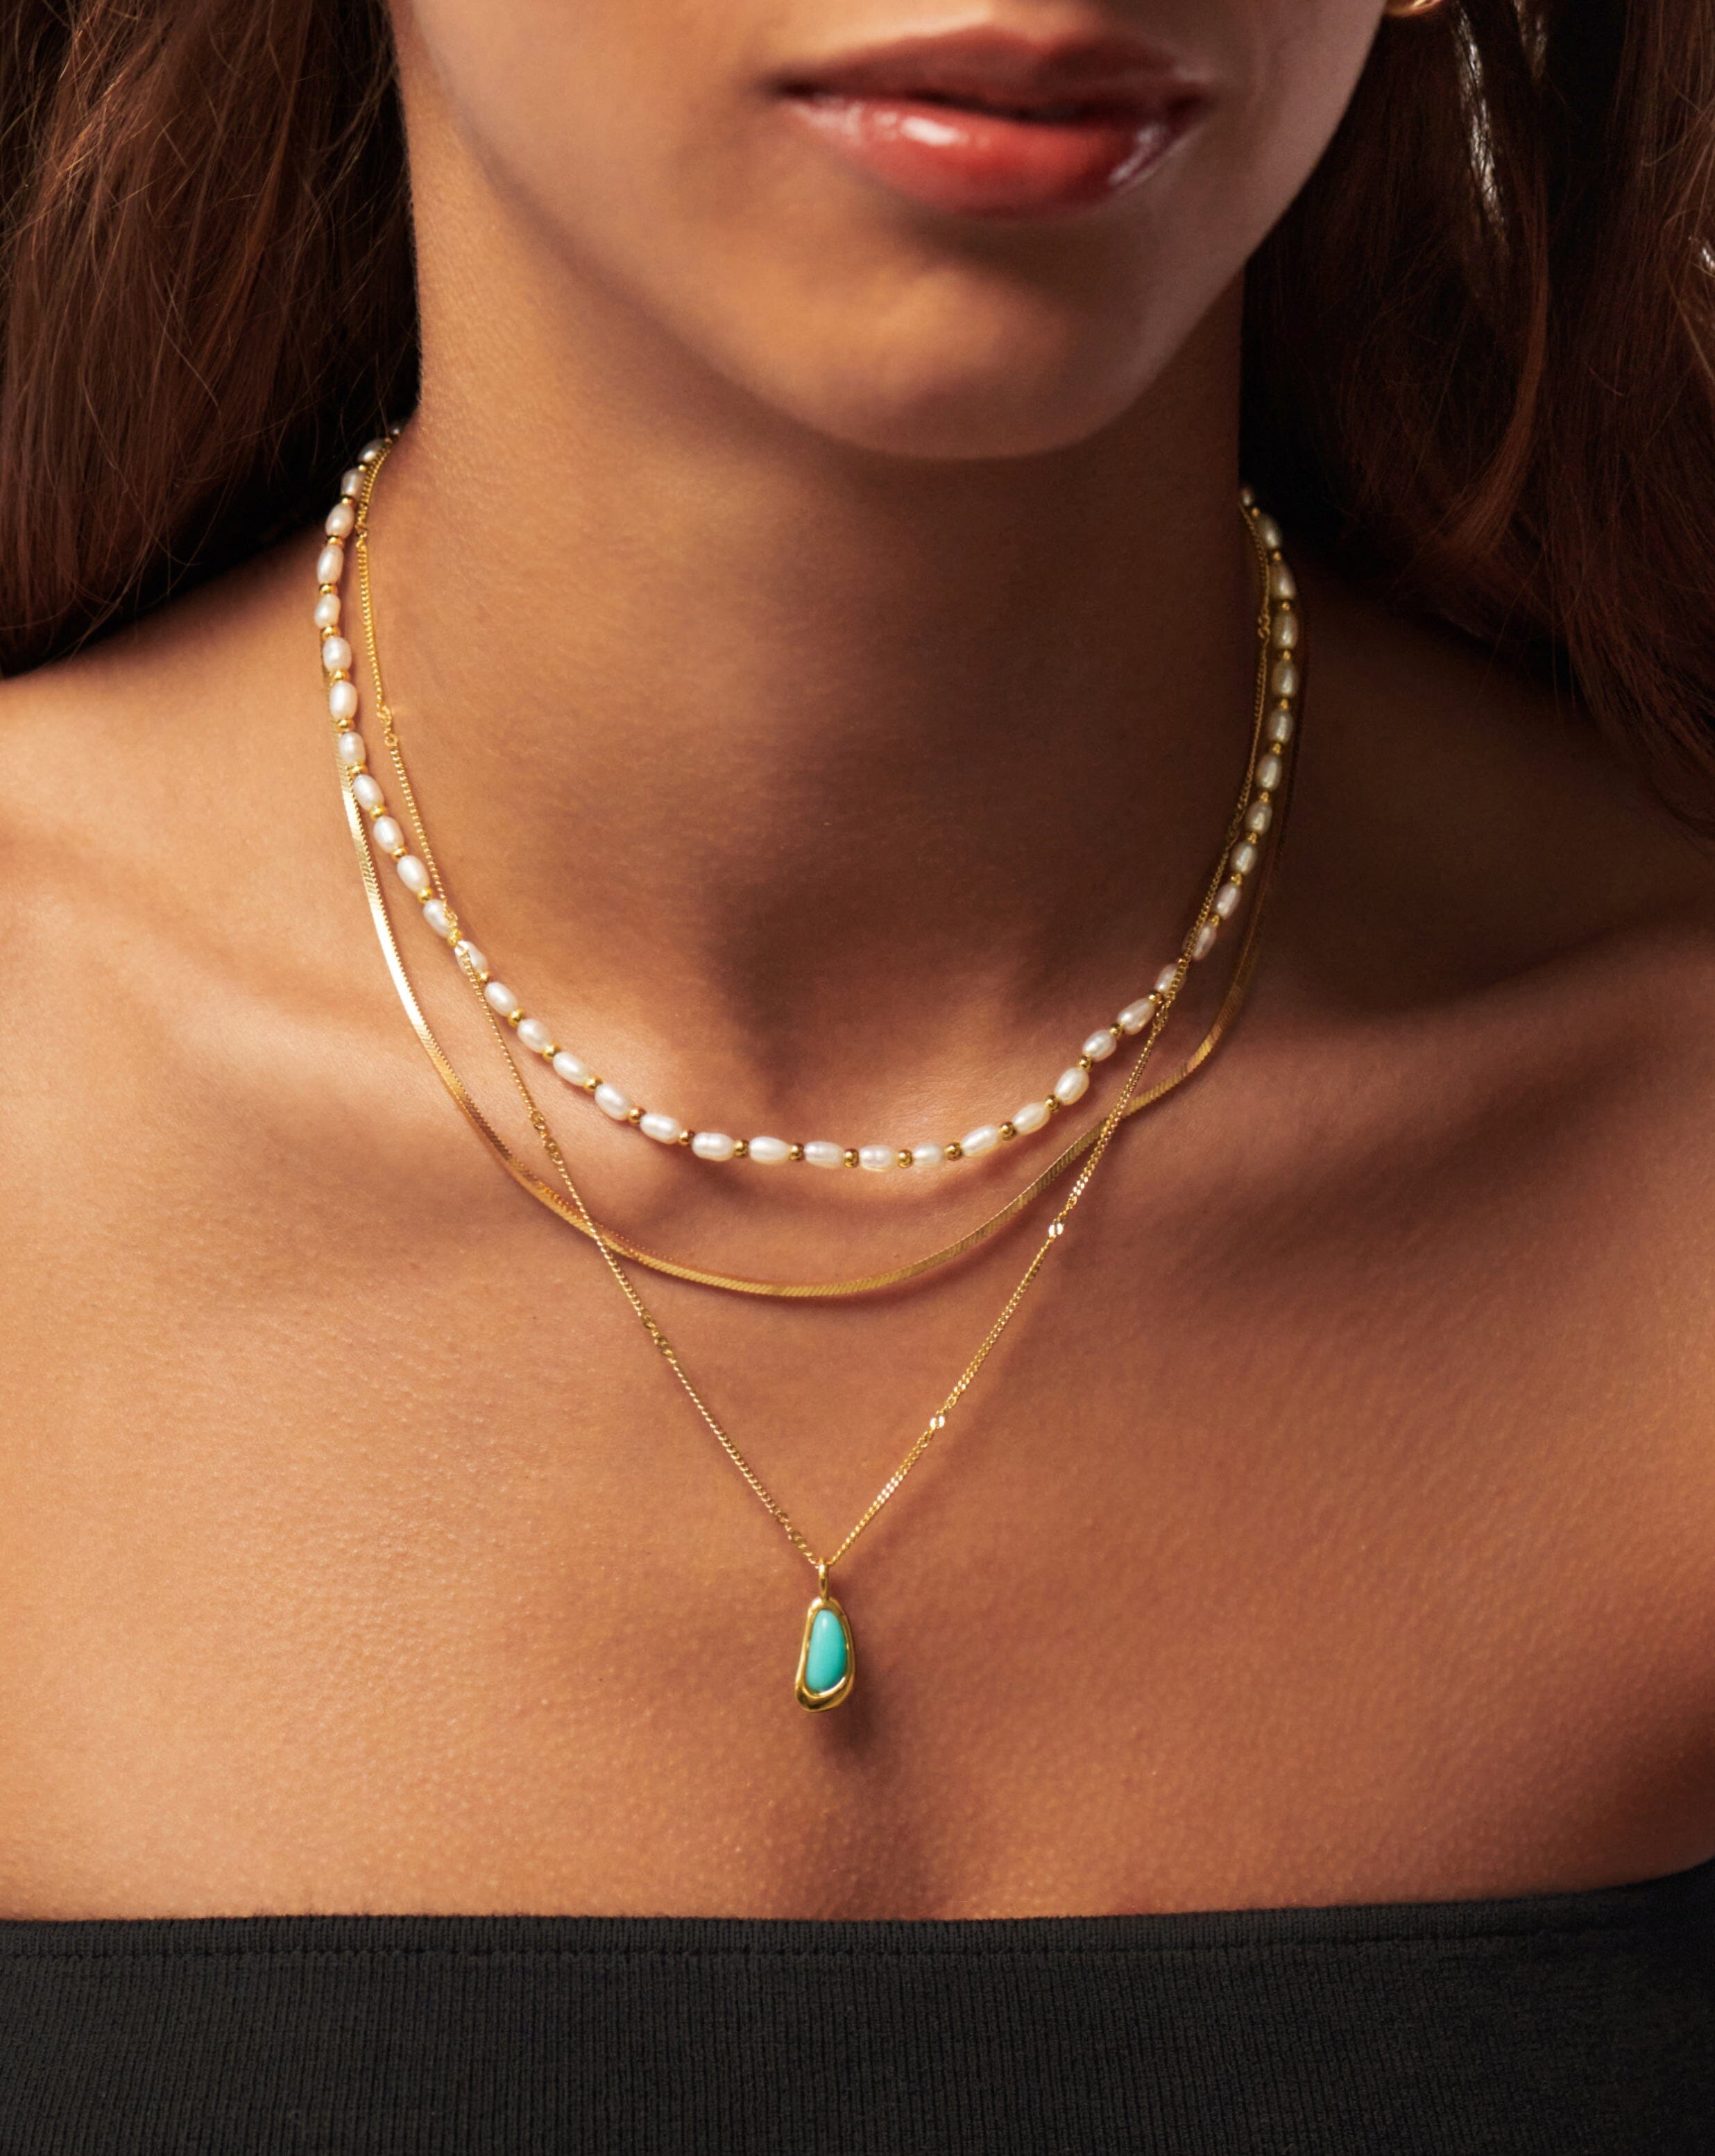 Molten Gemstone Bean Pendant Necklace | 18ct Gold Plated Vermeil/Turquoise Necklaces Missoma 